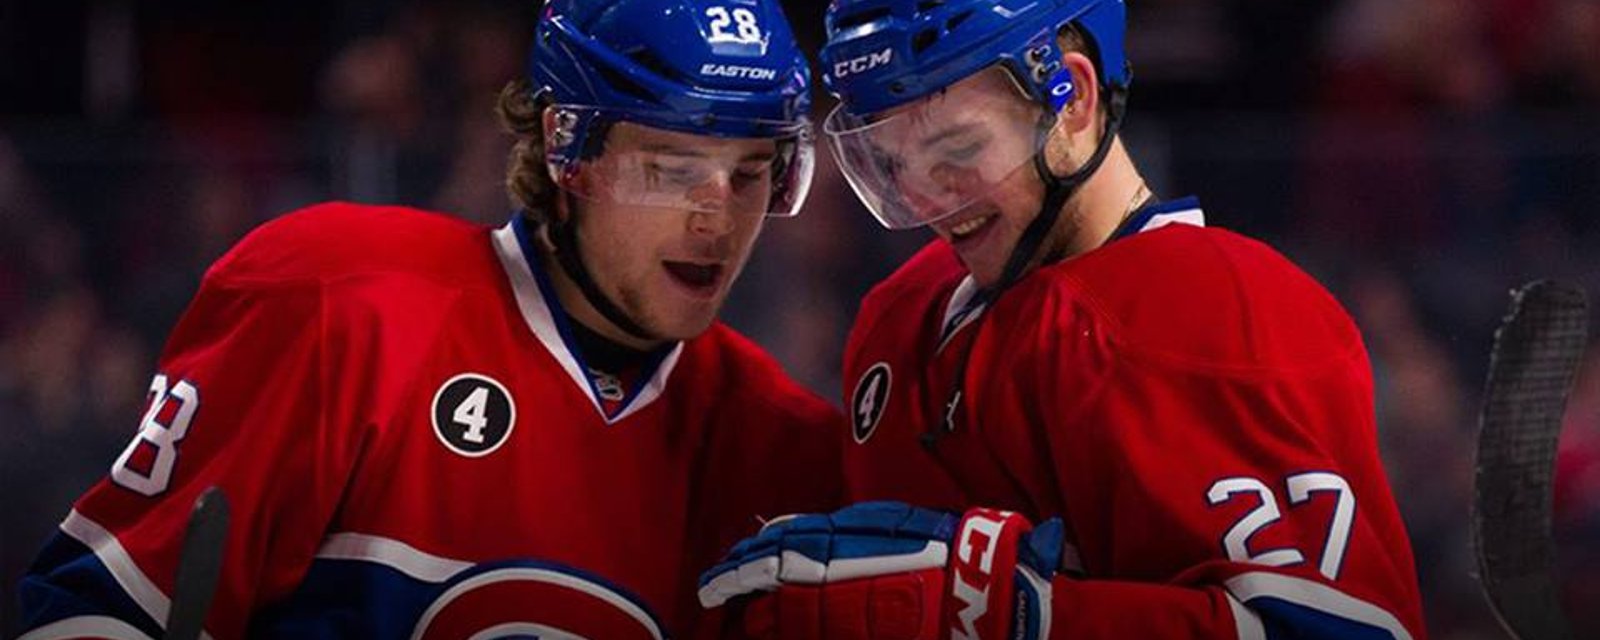 Beaulieu offers huge compliment to Galchenyuk